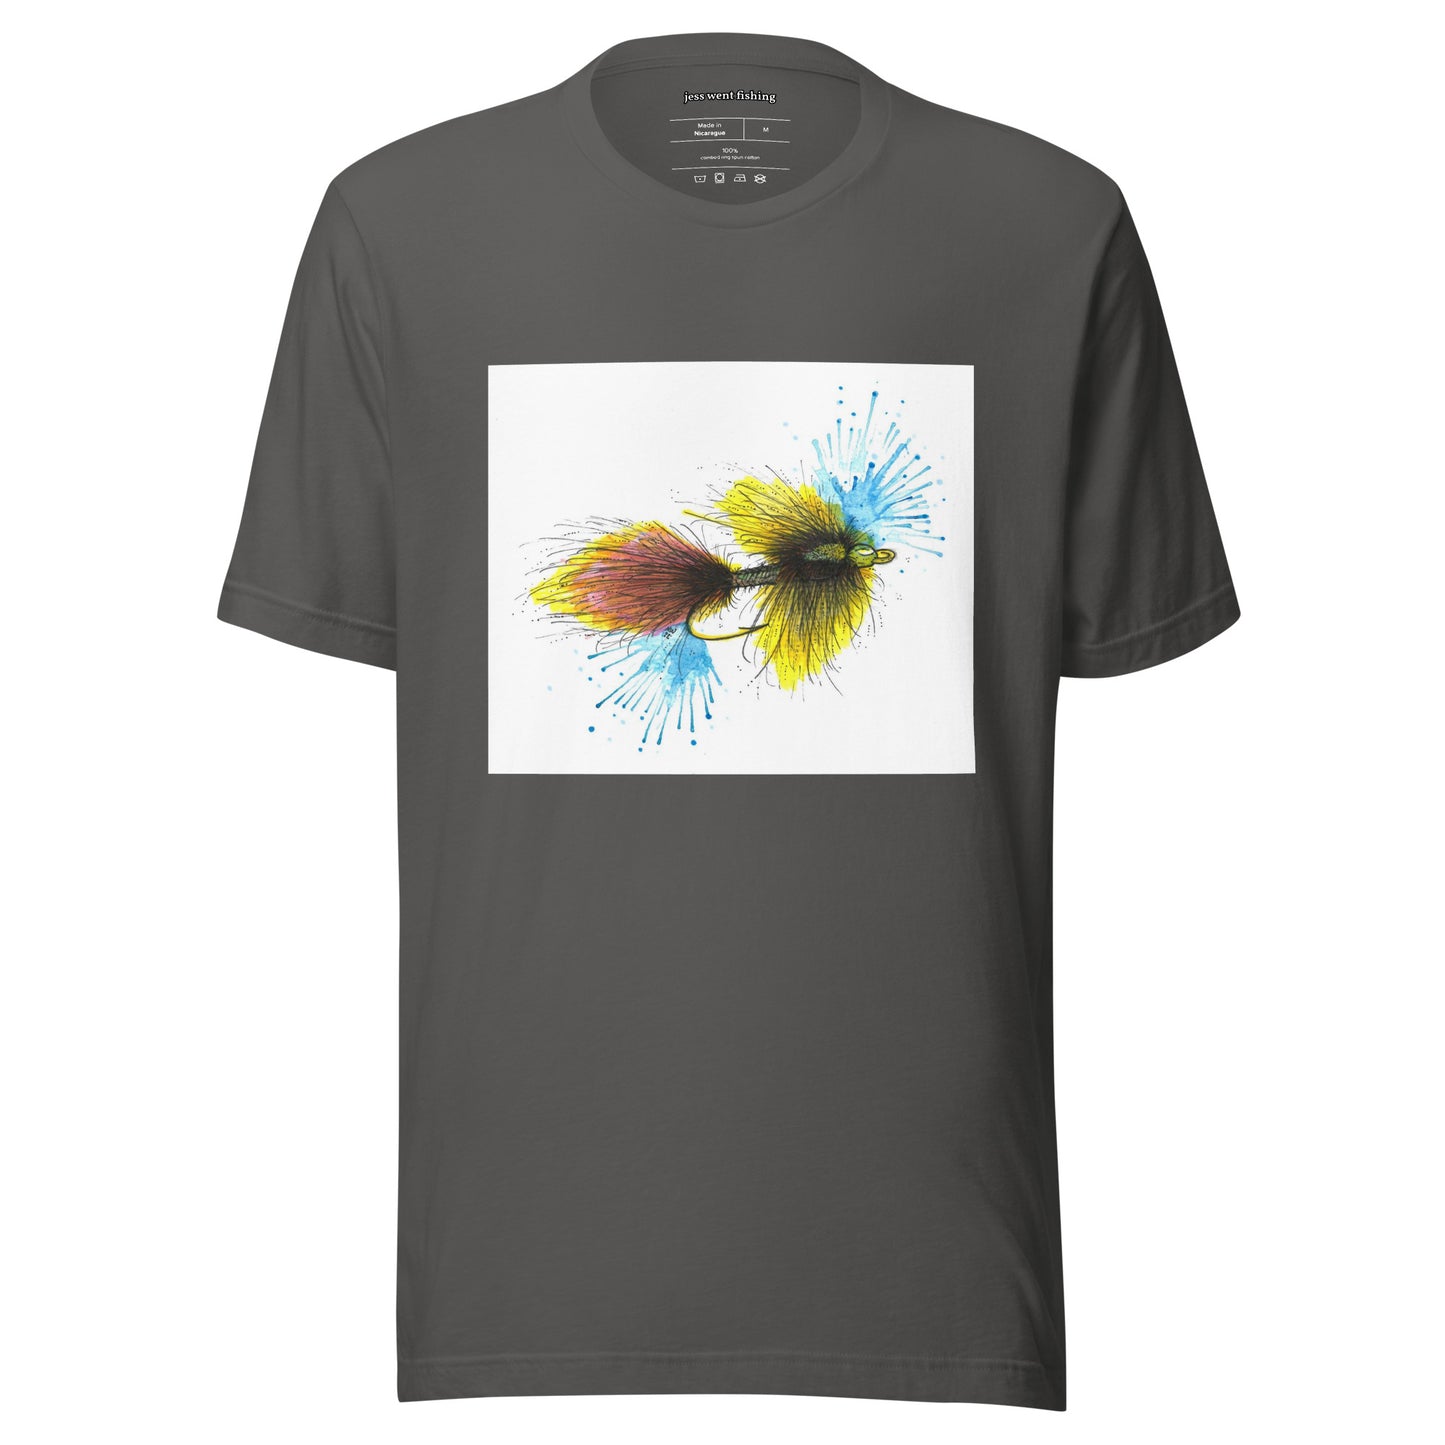 Woolly Bugger Fly Classic Fit Short-Sleeve T-Shirt For Men